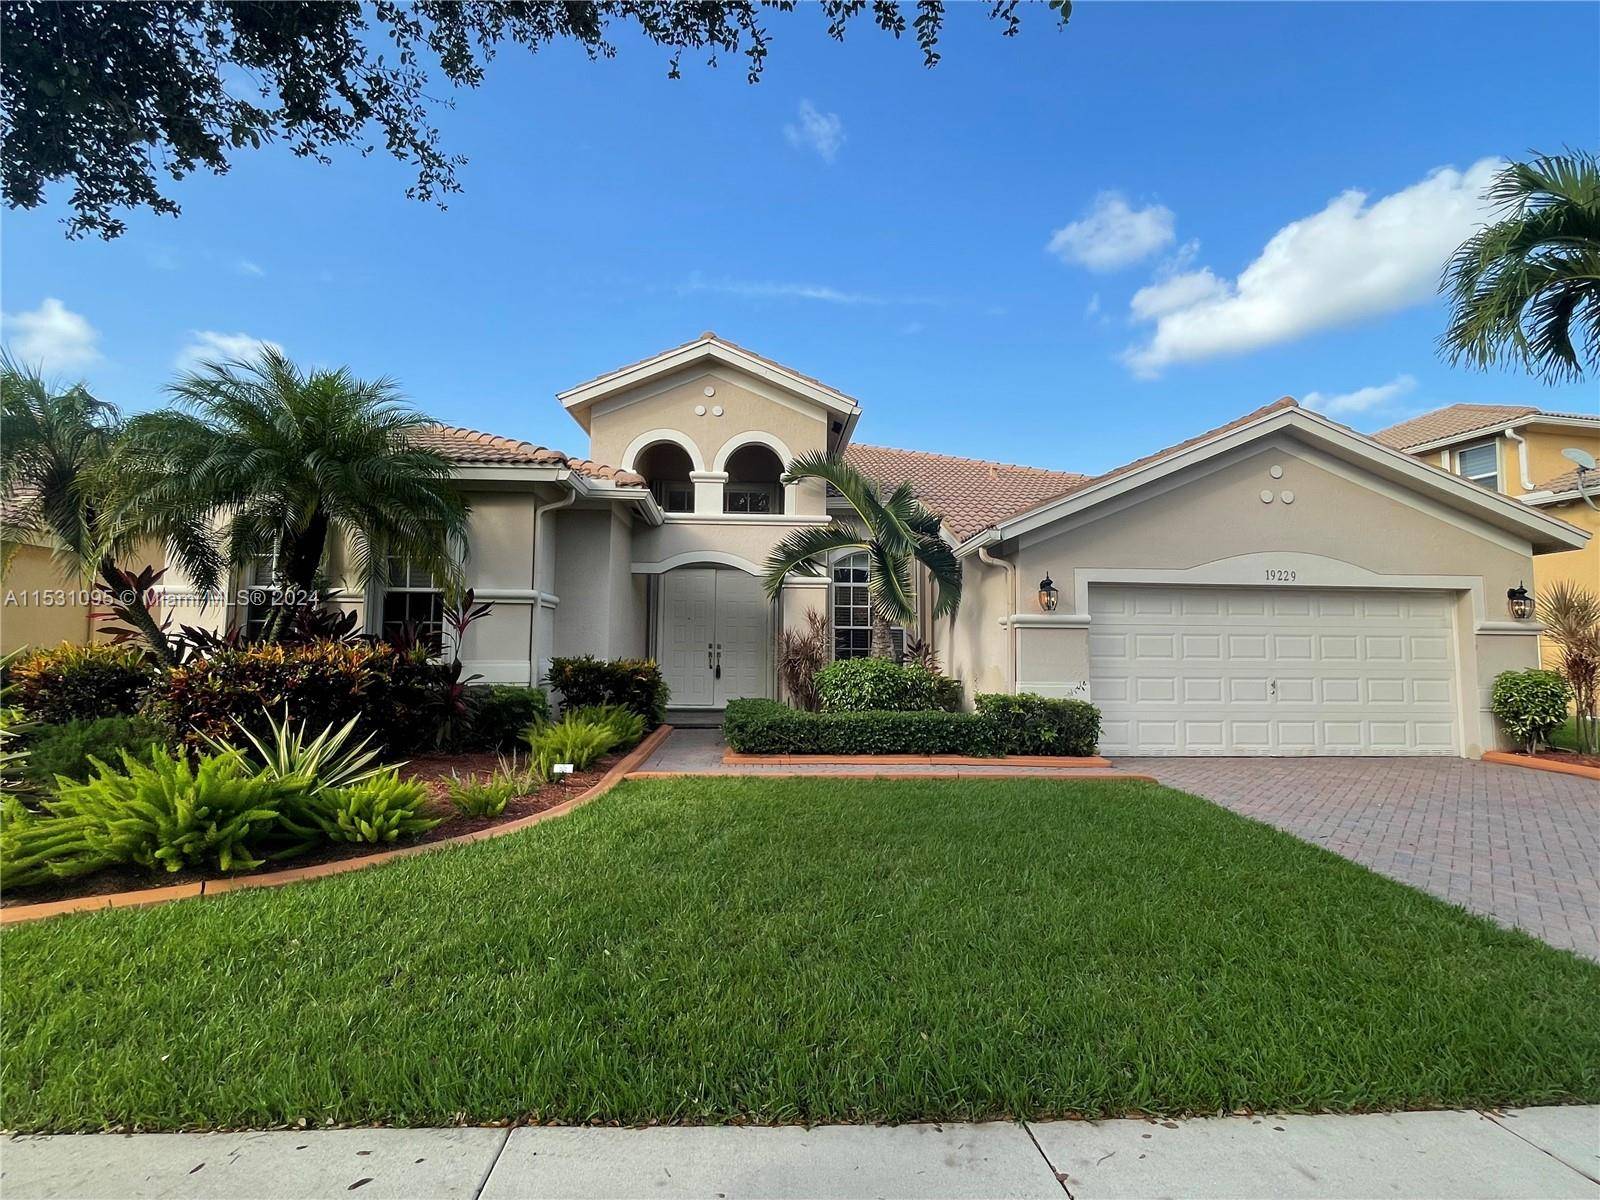 One Story Home in Isles at Weston Gated Community.